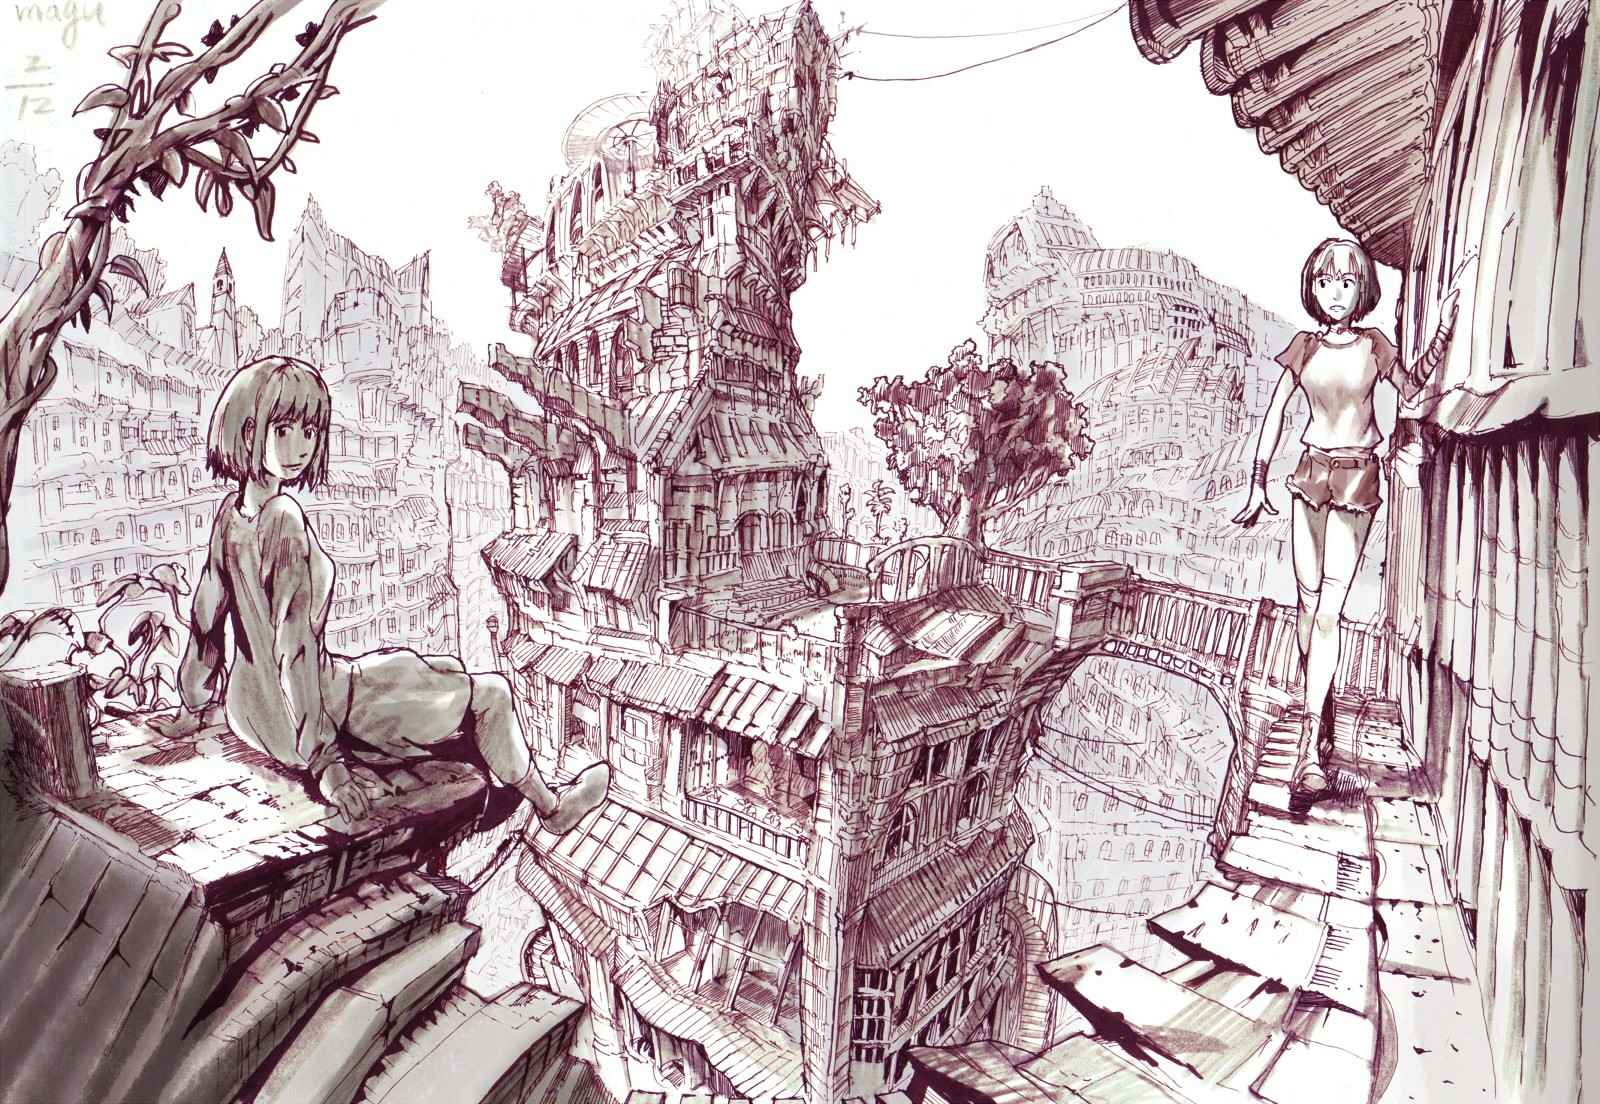 Anime 1600x1104 anime girls cityscape anime rooftops drawing two women